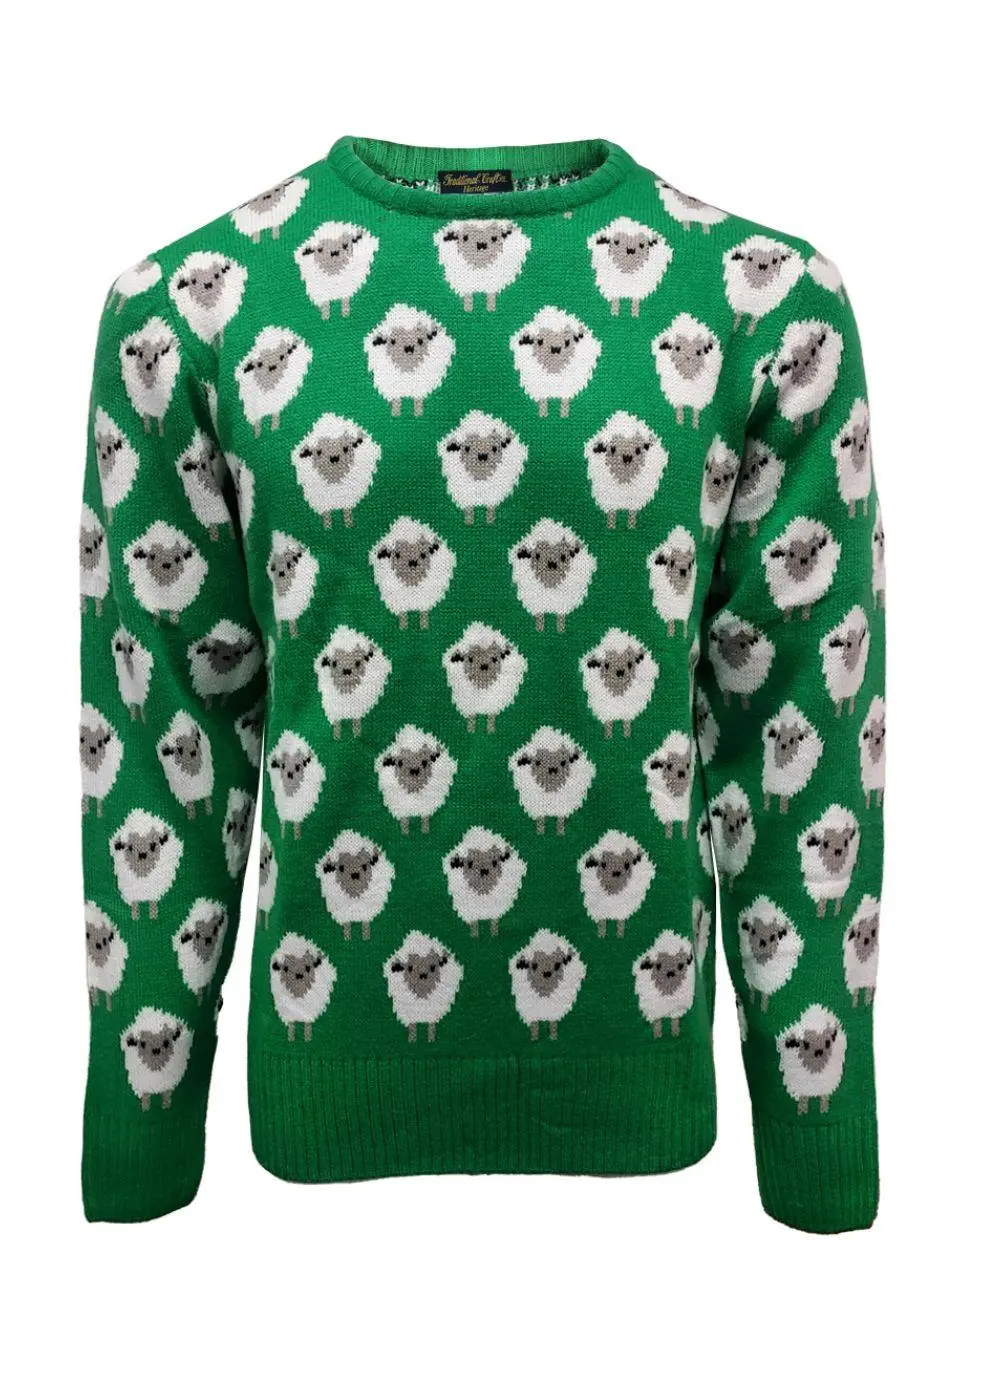 White cutout of green knit sweater with sheep pattern